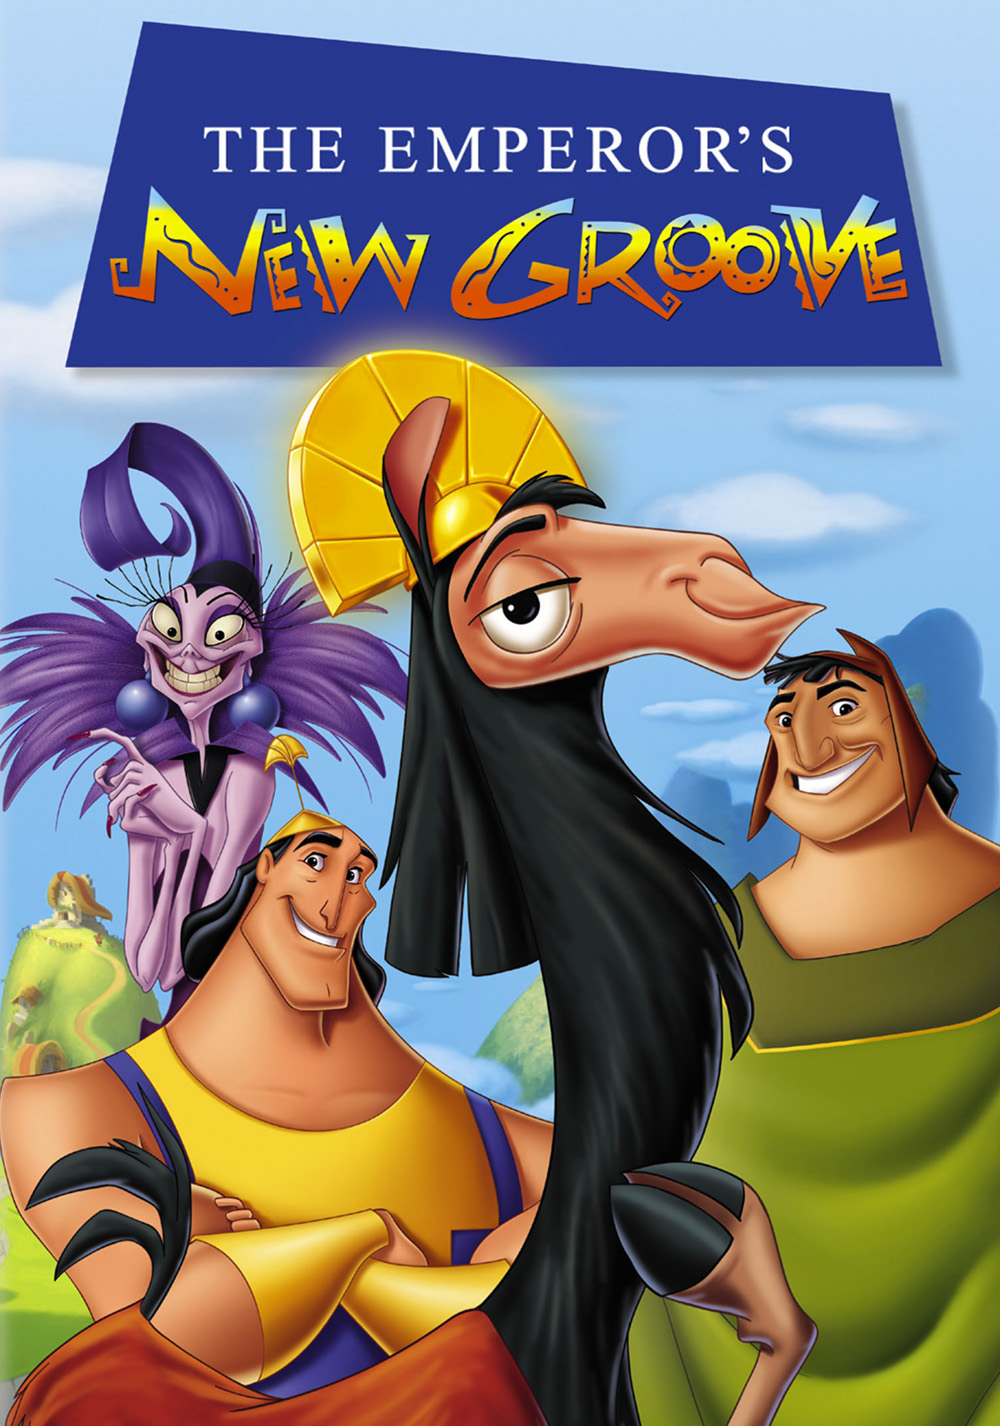 The Emperor's New Groove poster from https://fanart.tv